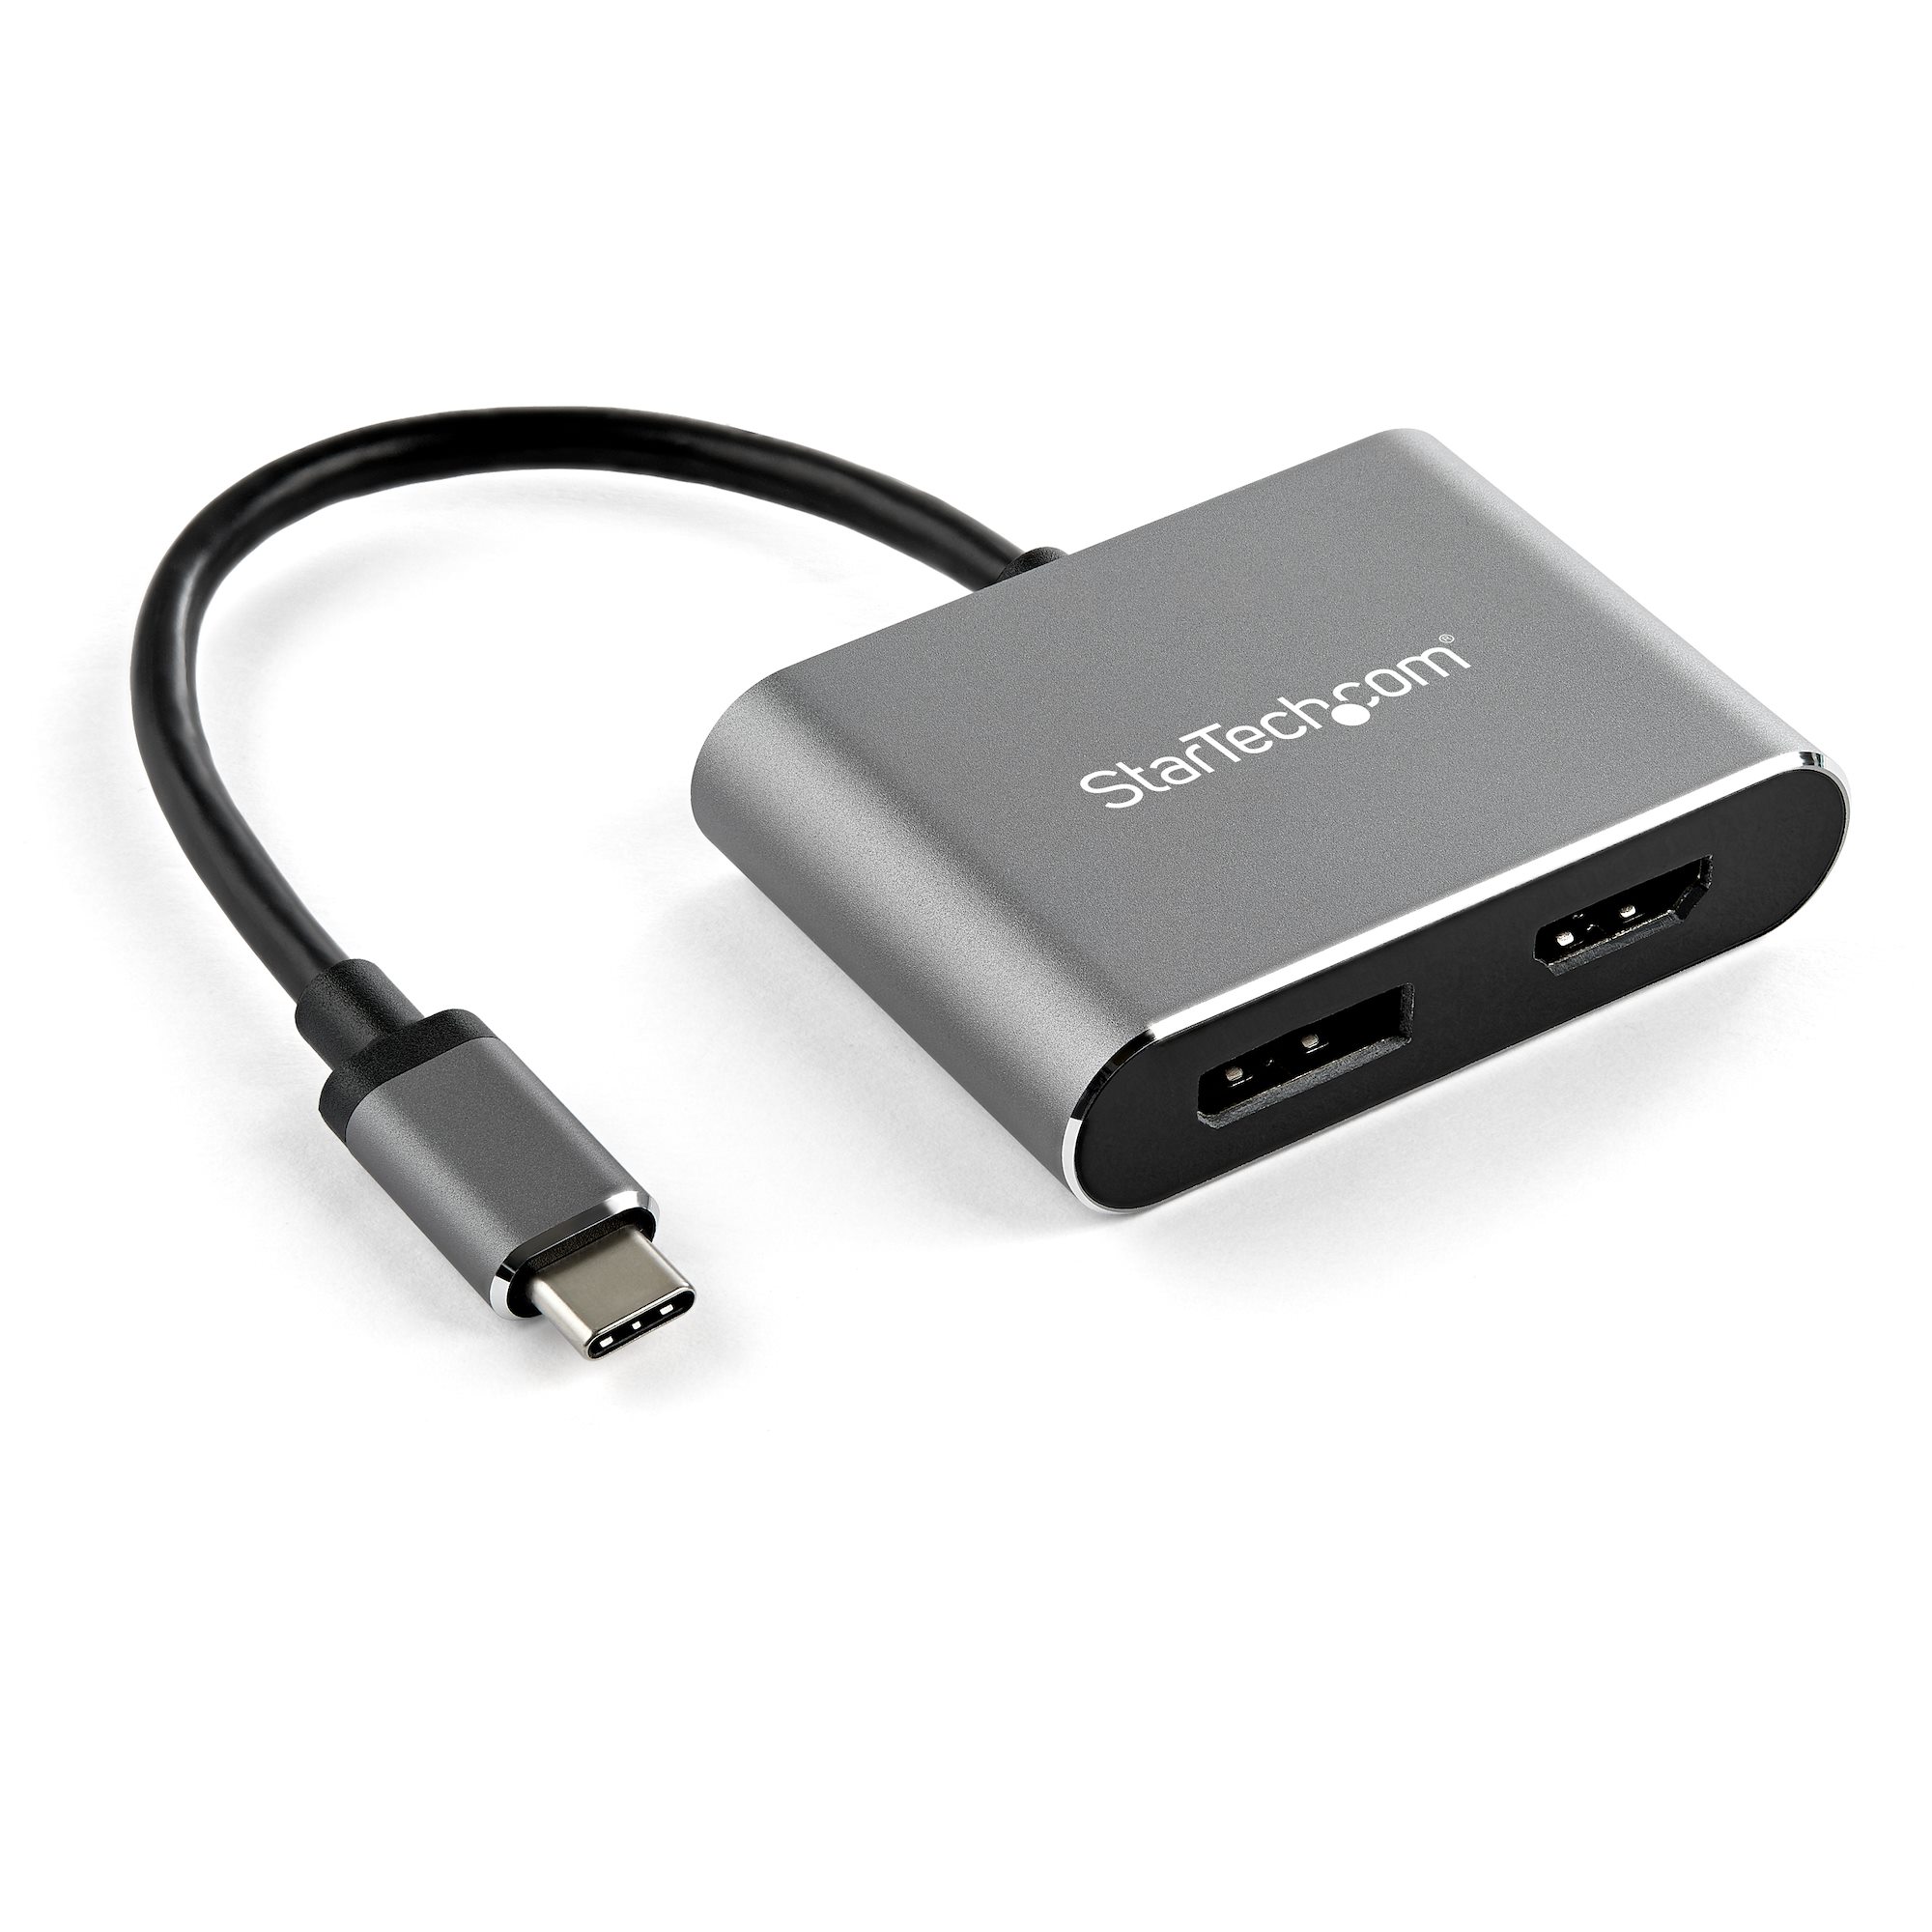 StarTech.com USB C Multiport Video Adapter, 4K 60Hz USB-C to HDMI or DisplayPort 1.2 Monitor Adapter, USB Type-C 2-in-1 Display Converter HDMI/DP HBR2 HDR, Thunderbolt 3 Compatible - USB-C 2 in